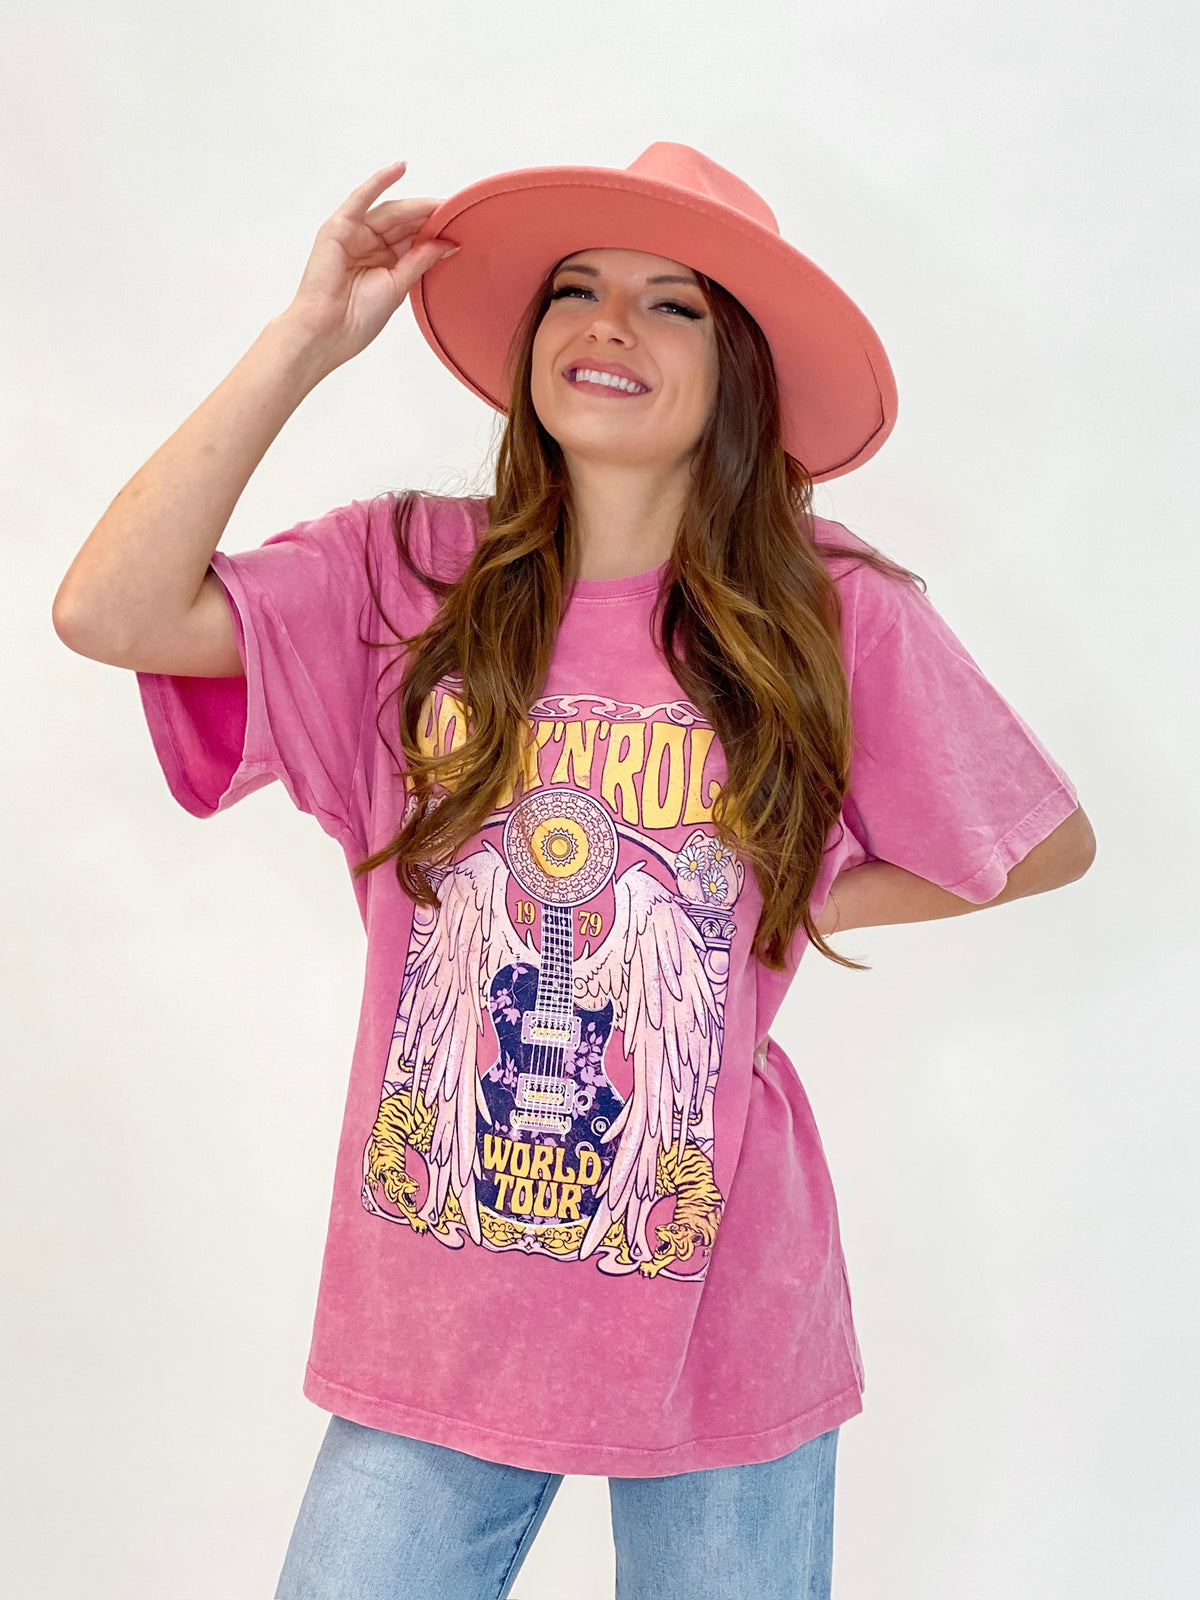 Rock ' N' Roll World Tour Graphic Tee Pink